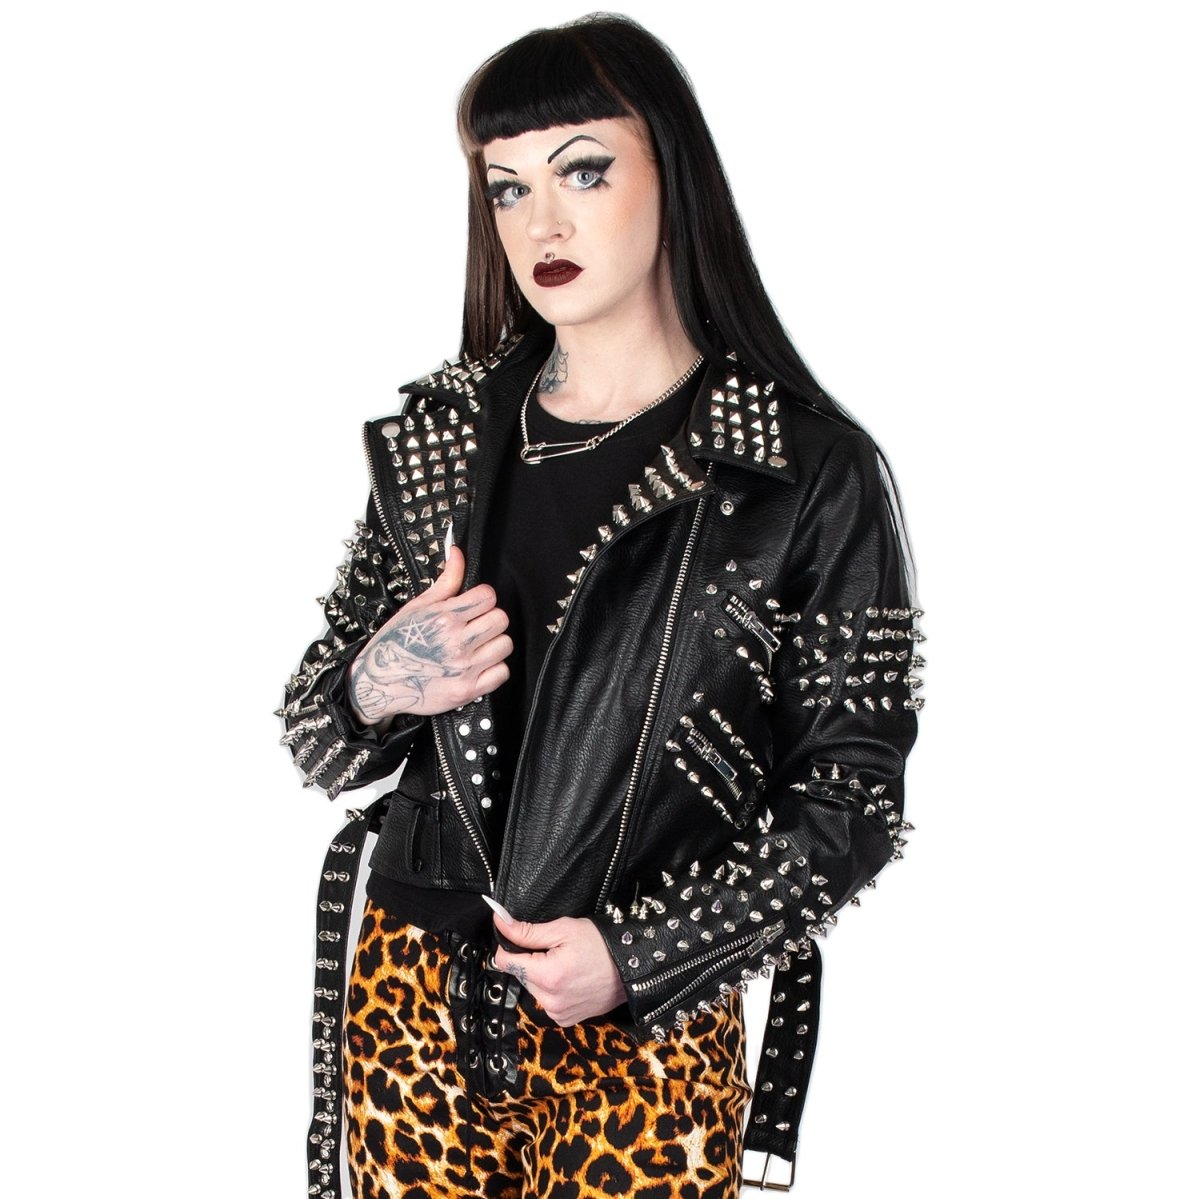 Orchid Bloom  Heavy Metal Studded Leather Jacket – Too Fast